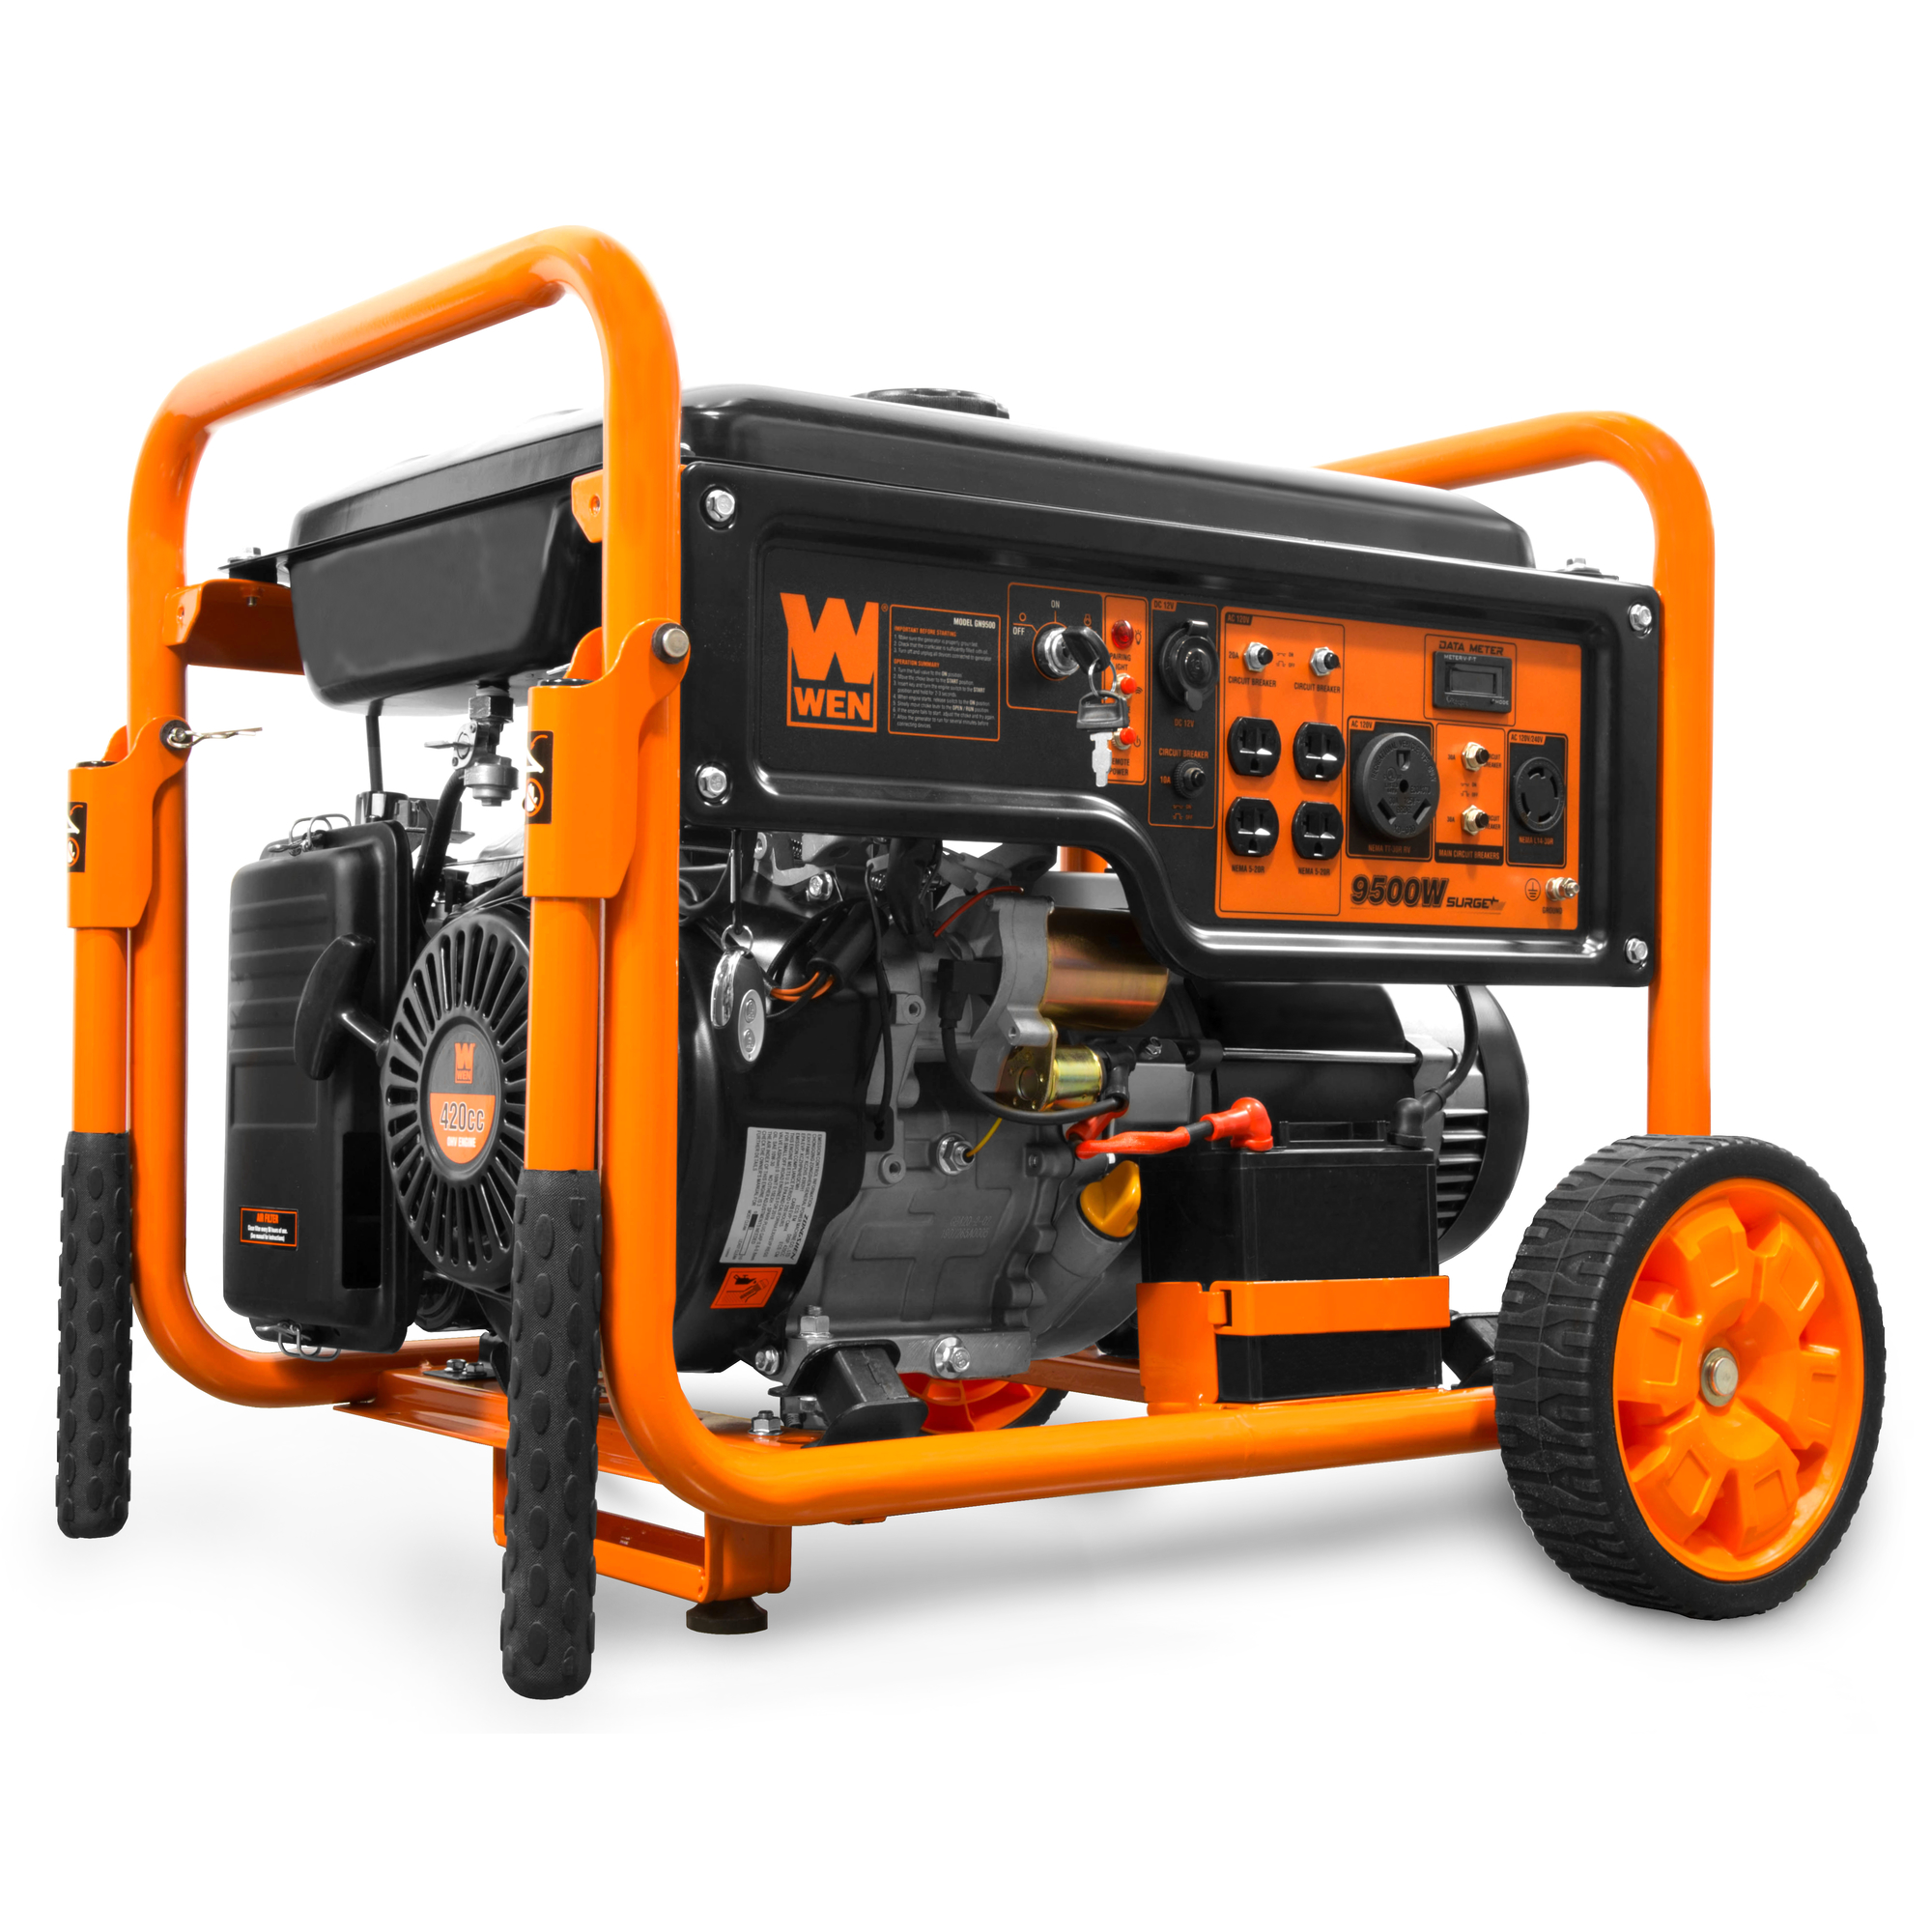 WEN, 9500W Generator, Remote Electric Start CO Sensor, Surge Watts 9500 Rated Watts 7500 Voltage 120/240 Model GN9500X